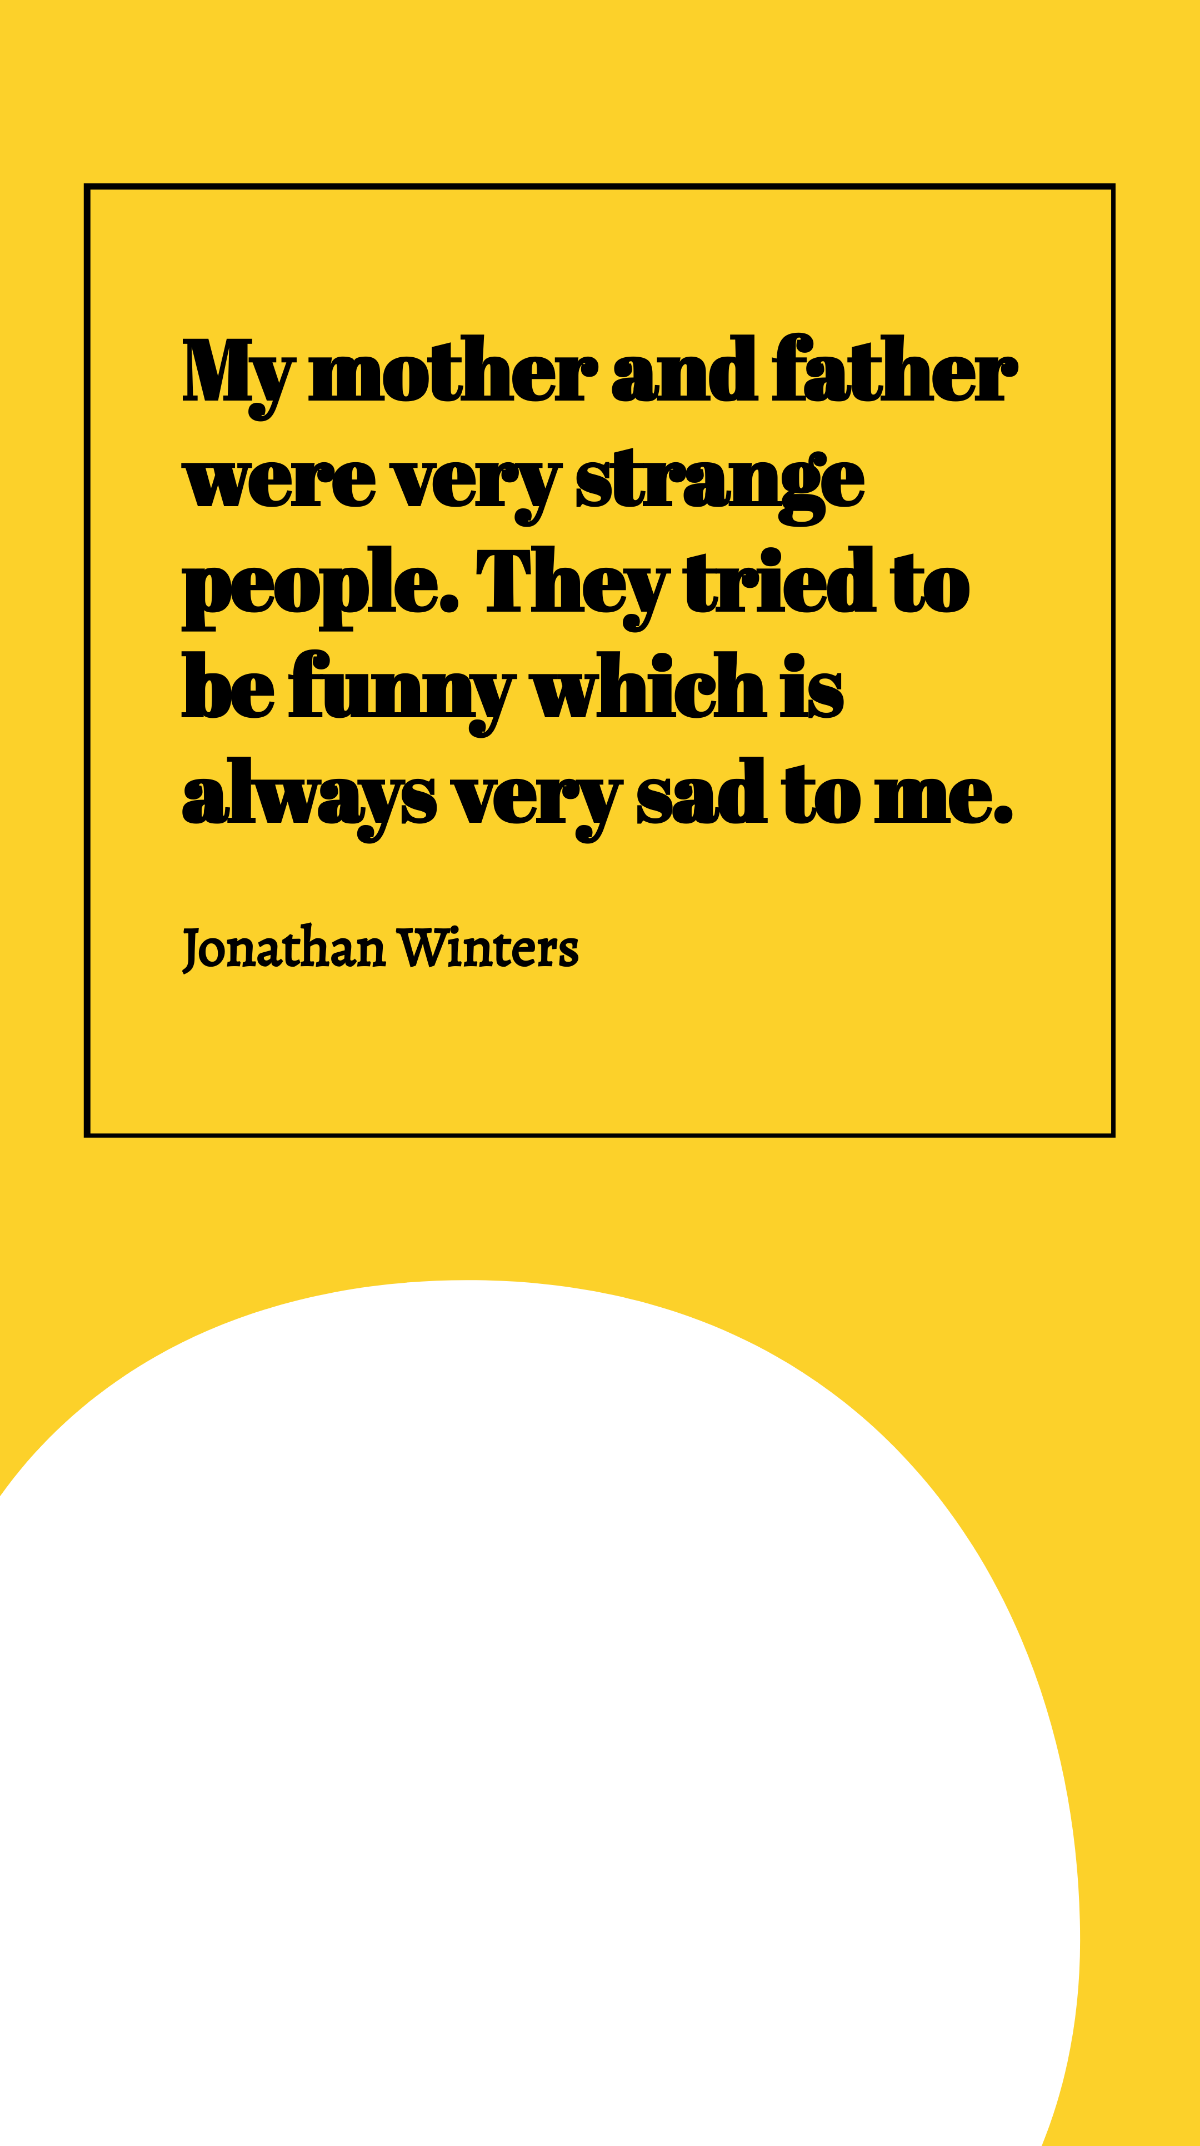 Jonathan Winters - My mother and father were very strange people. They tried to be funny which is always very sad to me. Template